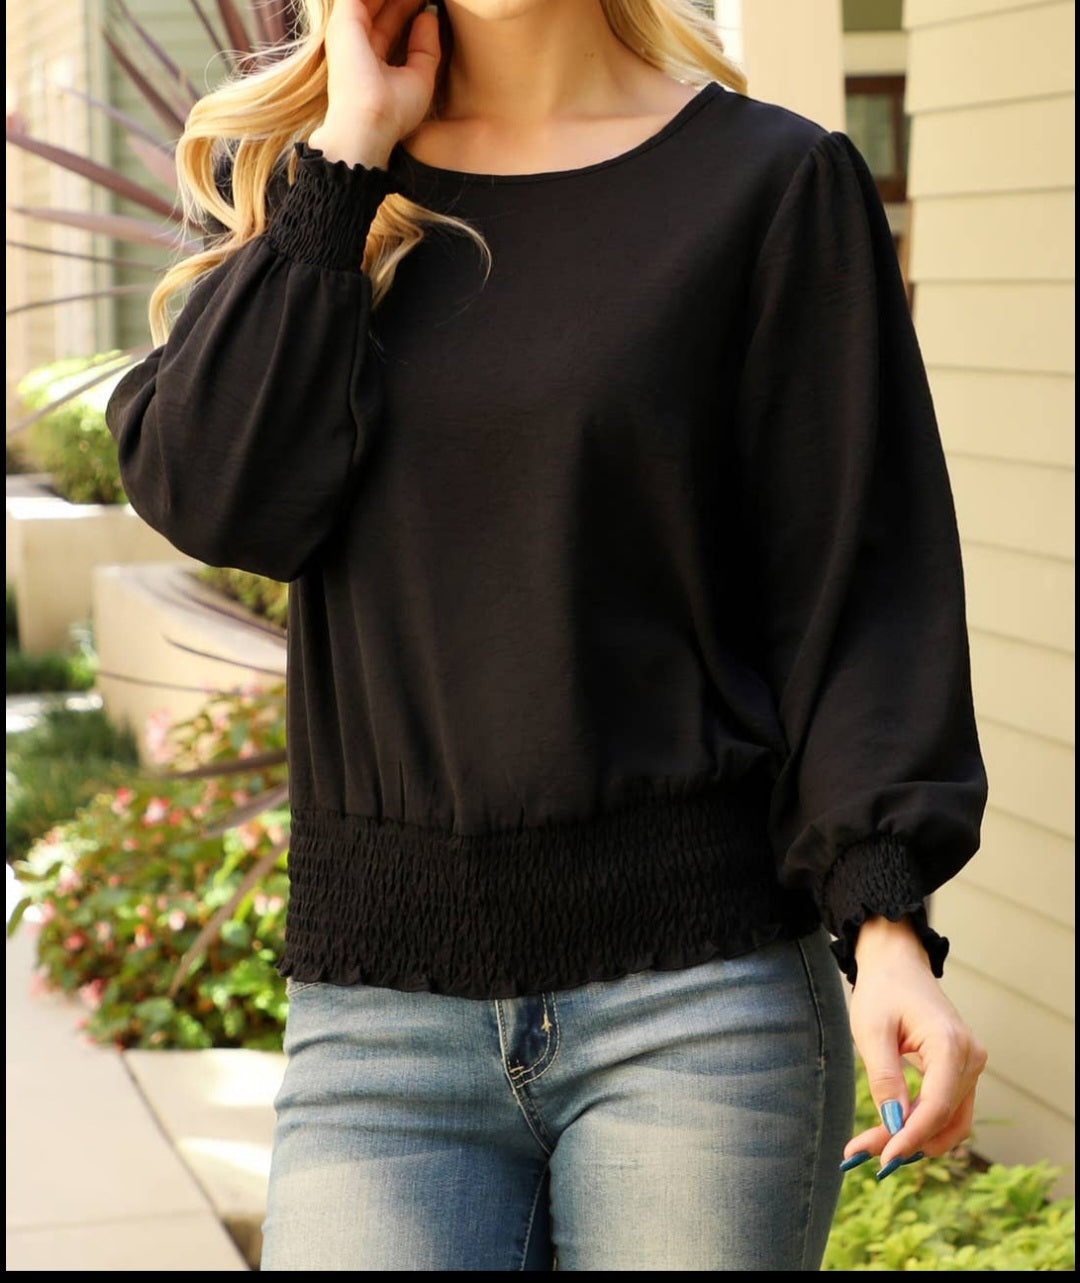 Woven Black Top with Long Sleeves